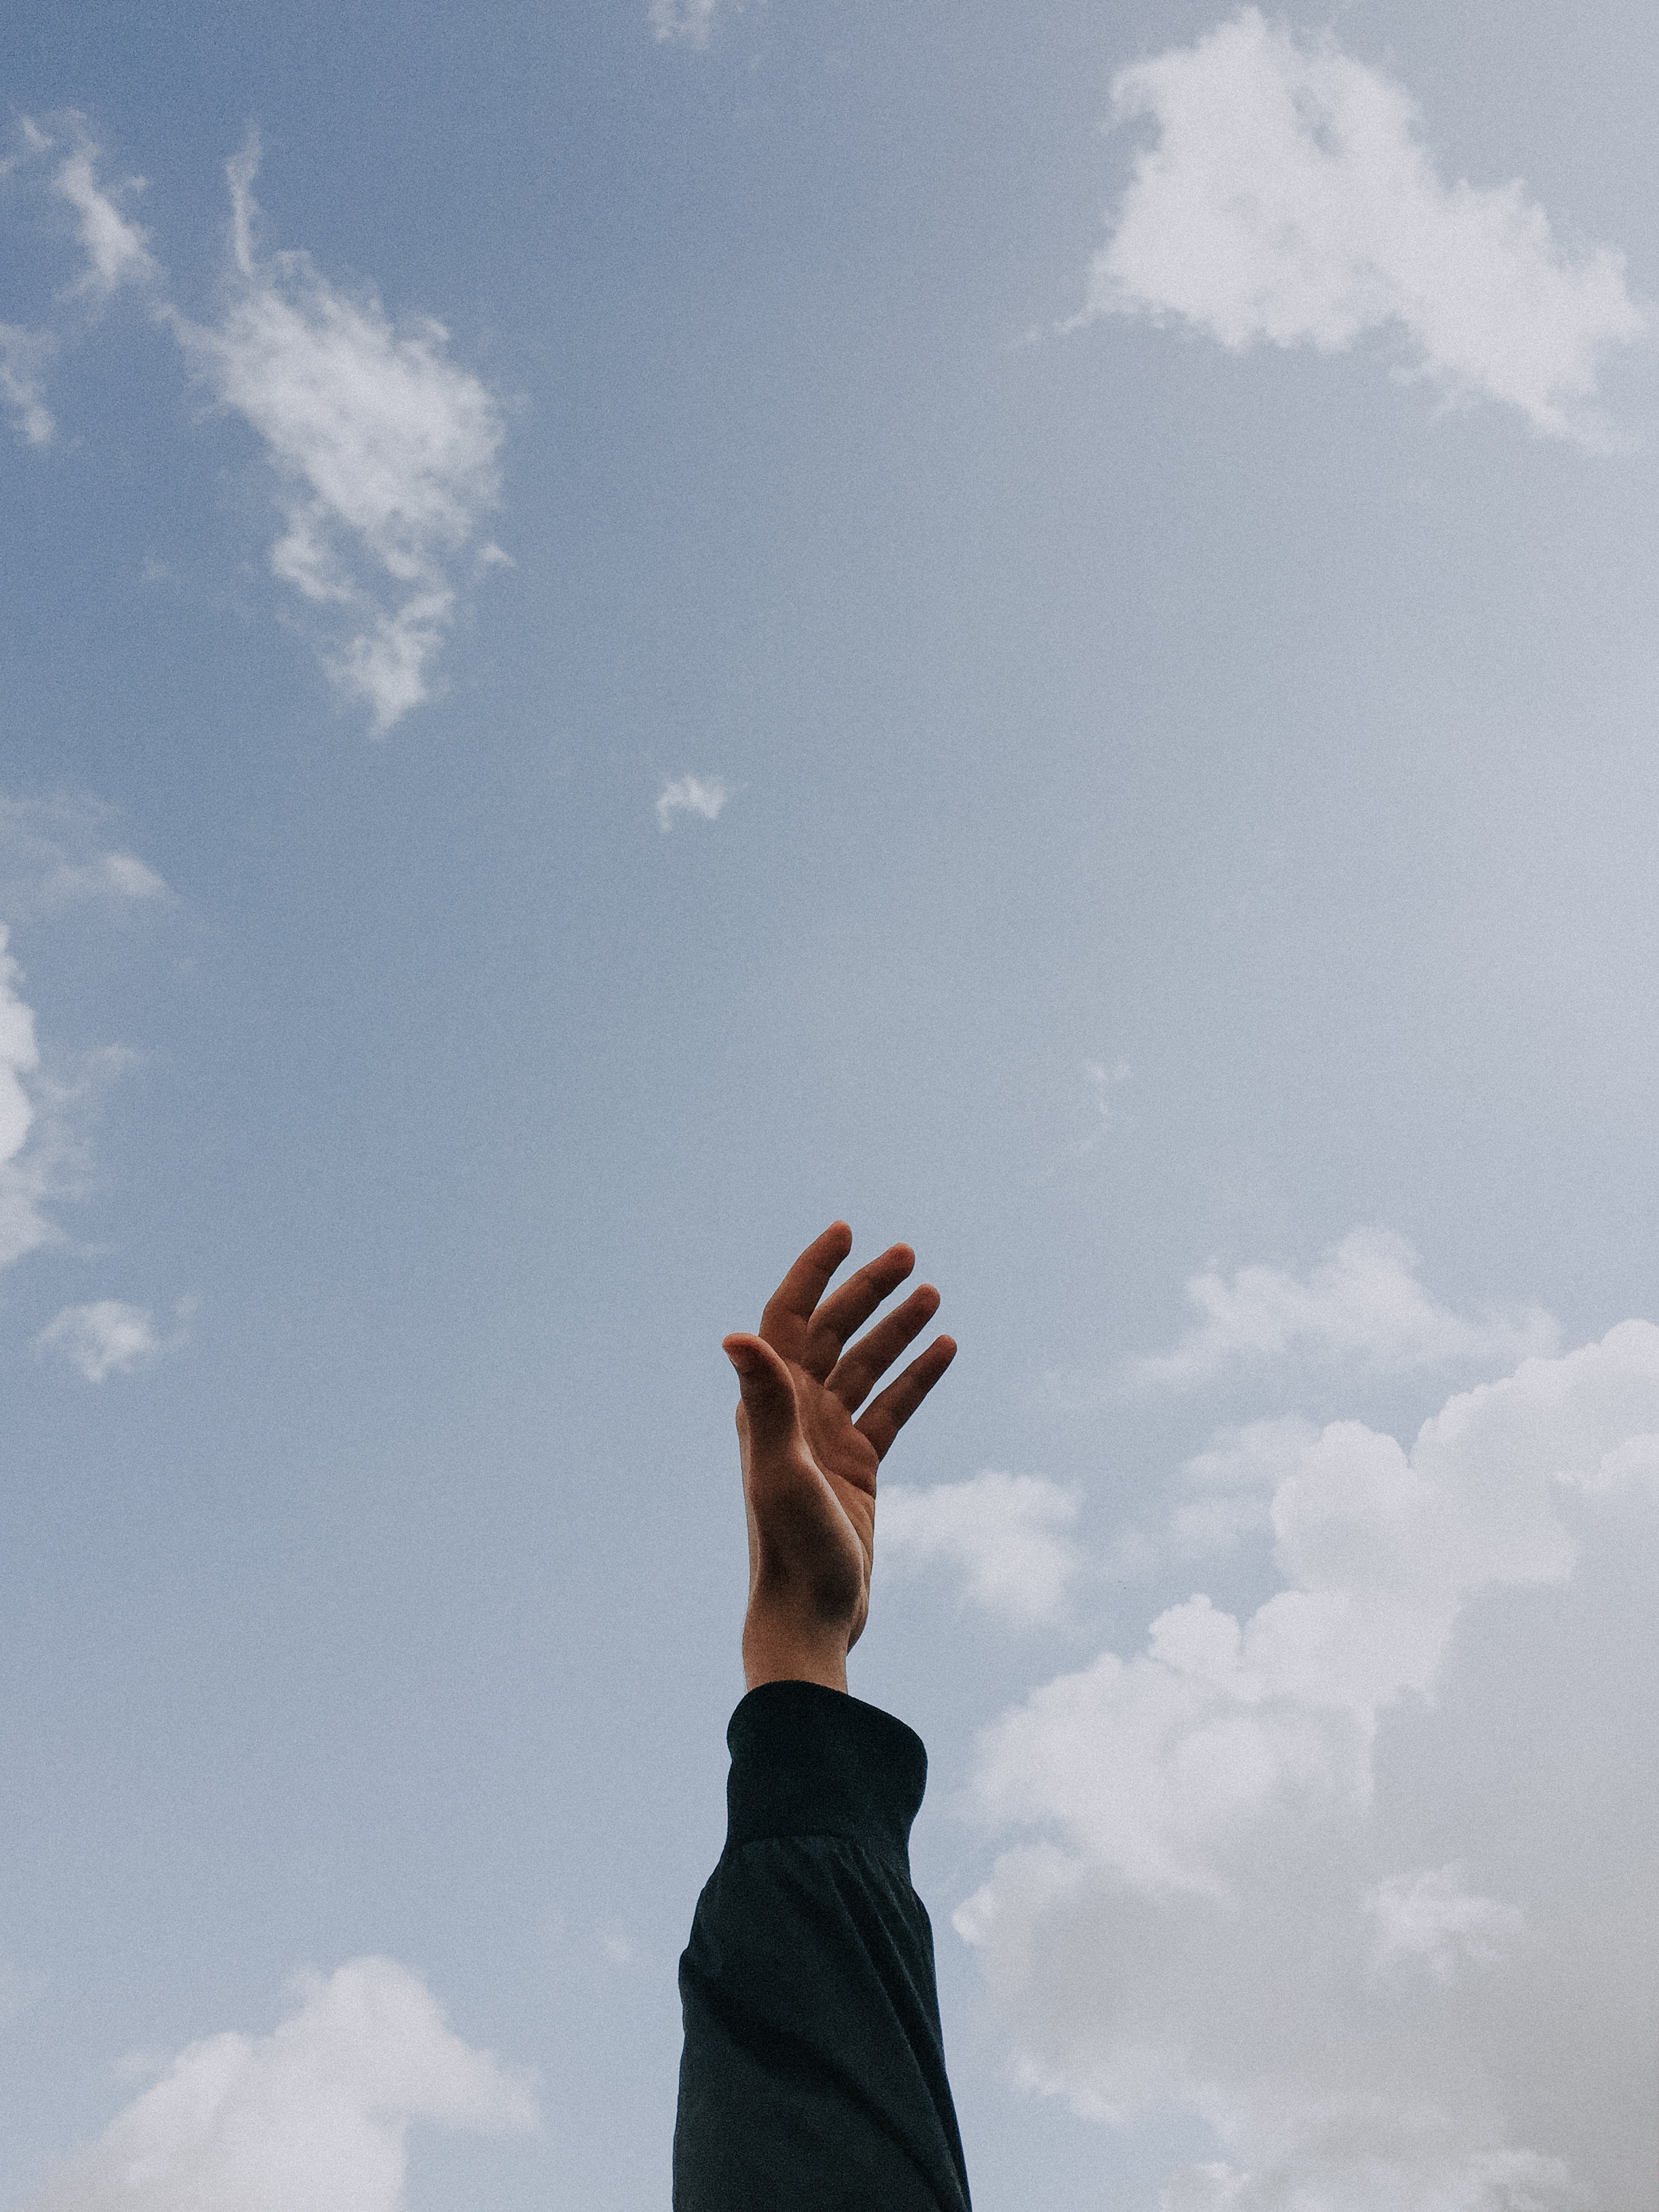 hand, freedom, minimalism, fingers, clouds, sky, lift up, raise wallpaper for mobile